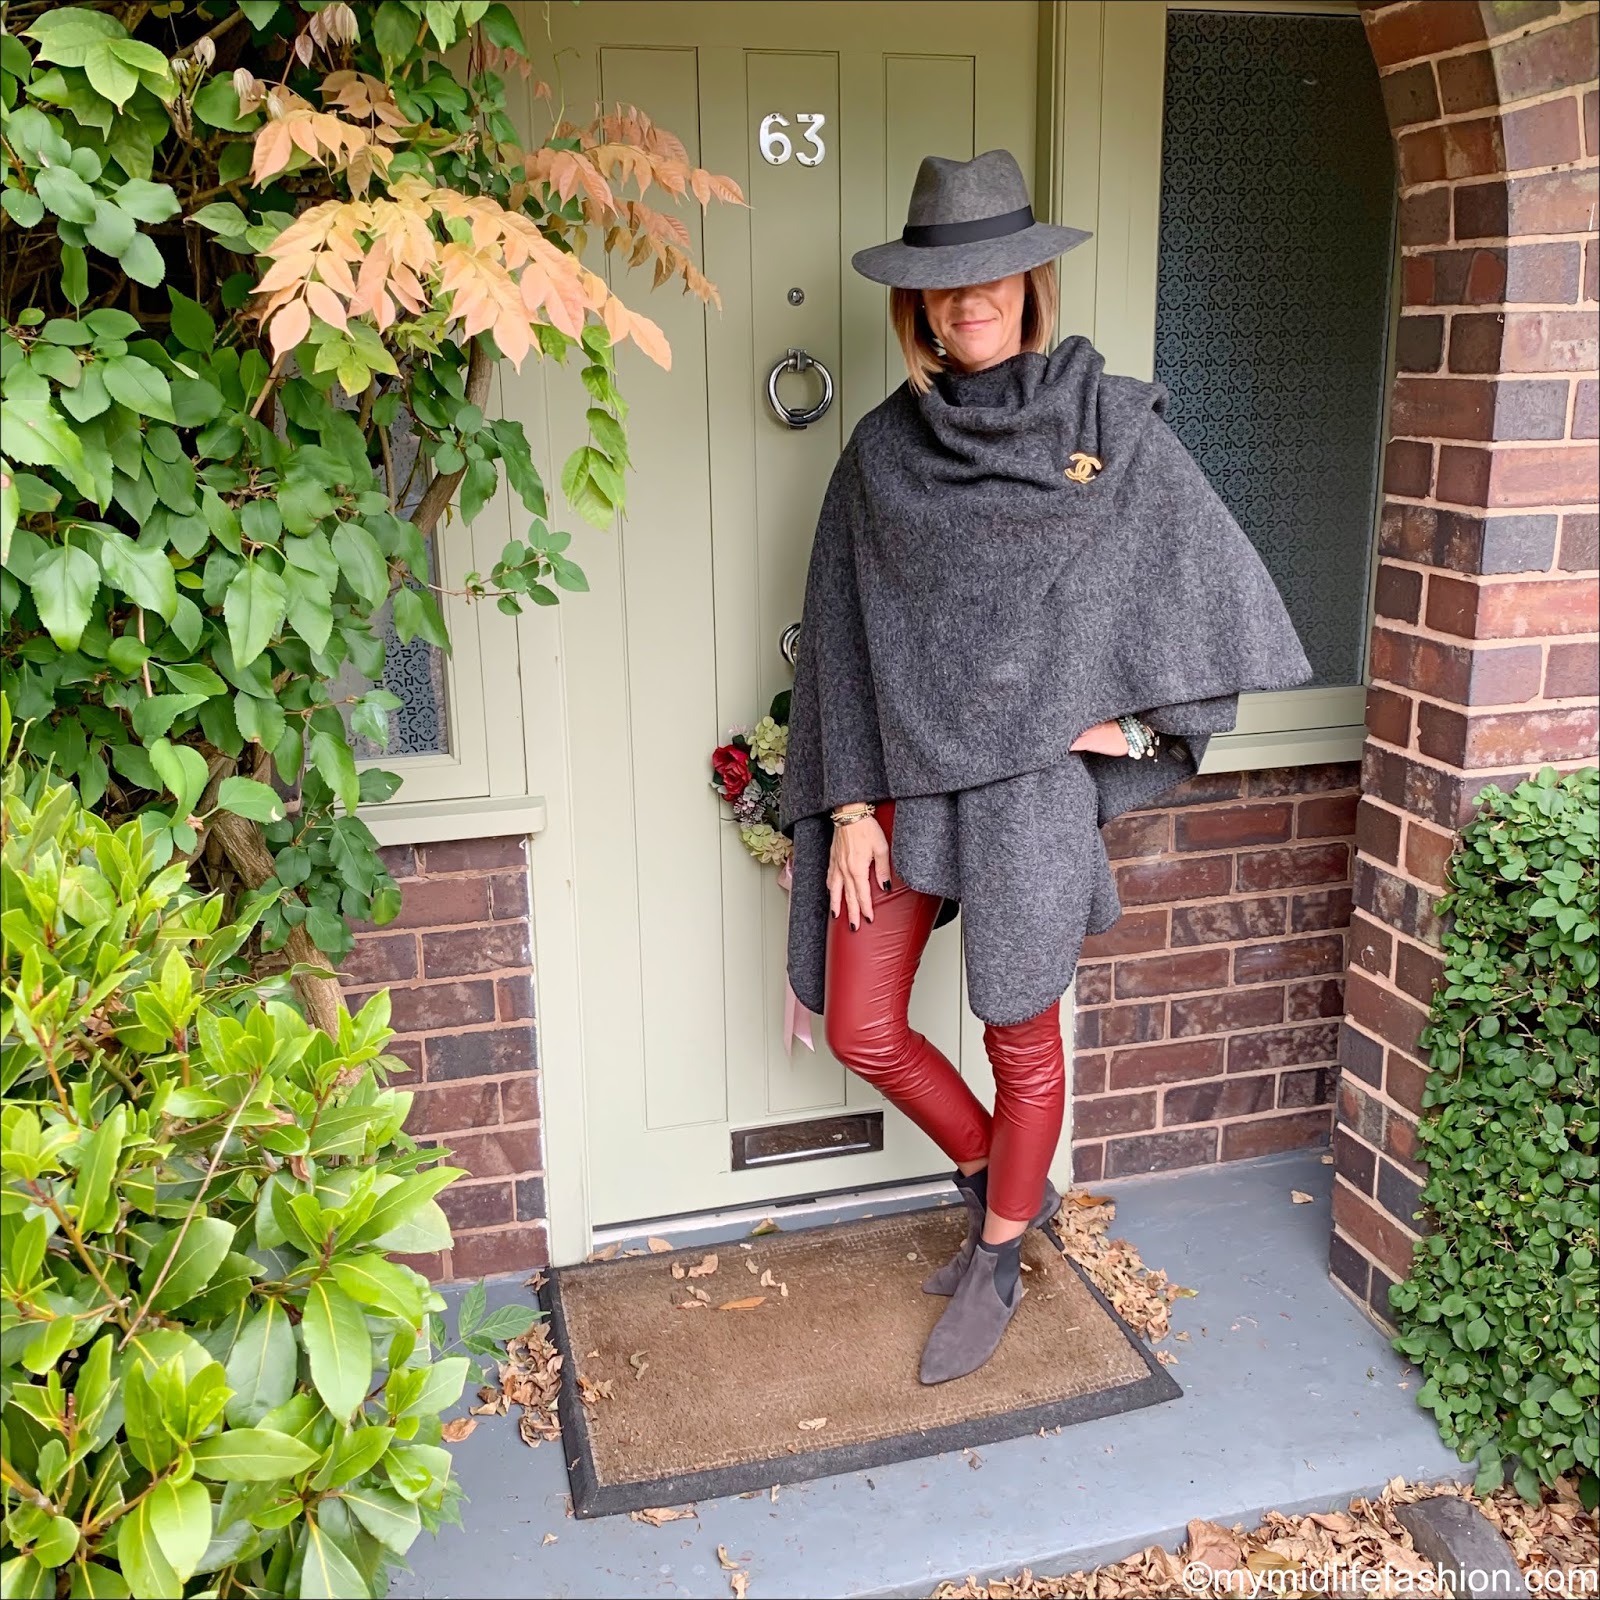 my midlife fashion, Zara felt fedora hat, Chanel vintage brooch, h and m cashmere sweatshirt jumper, Isabel Marant Etoile faux leather trousers, Madeleine fashion ankle boots, the sea company mindful stack bracelets, hope fashion the boiled wool blanket poncho